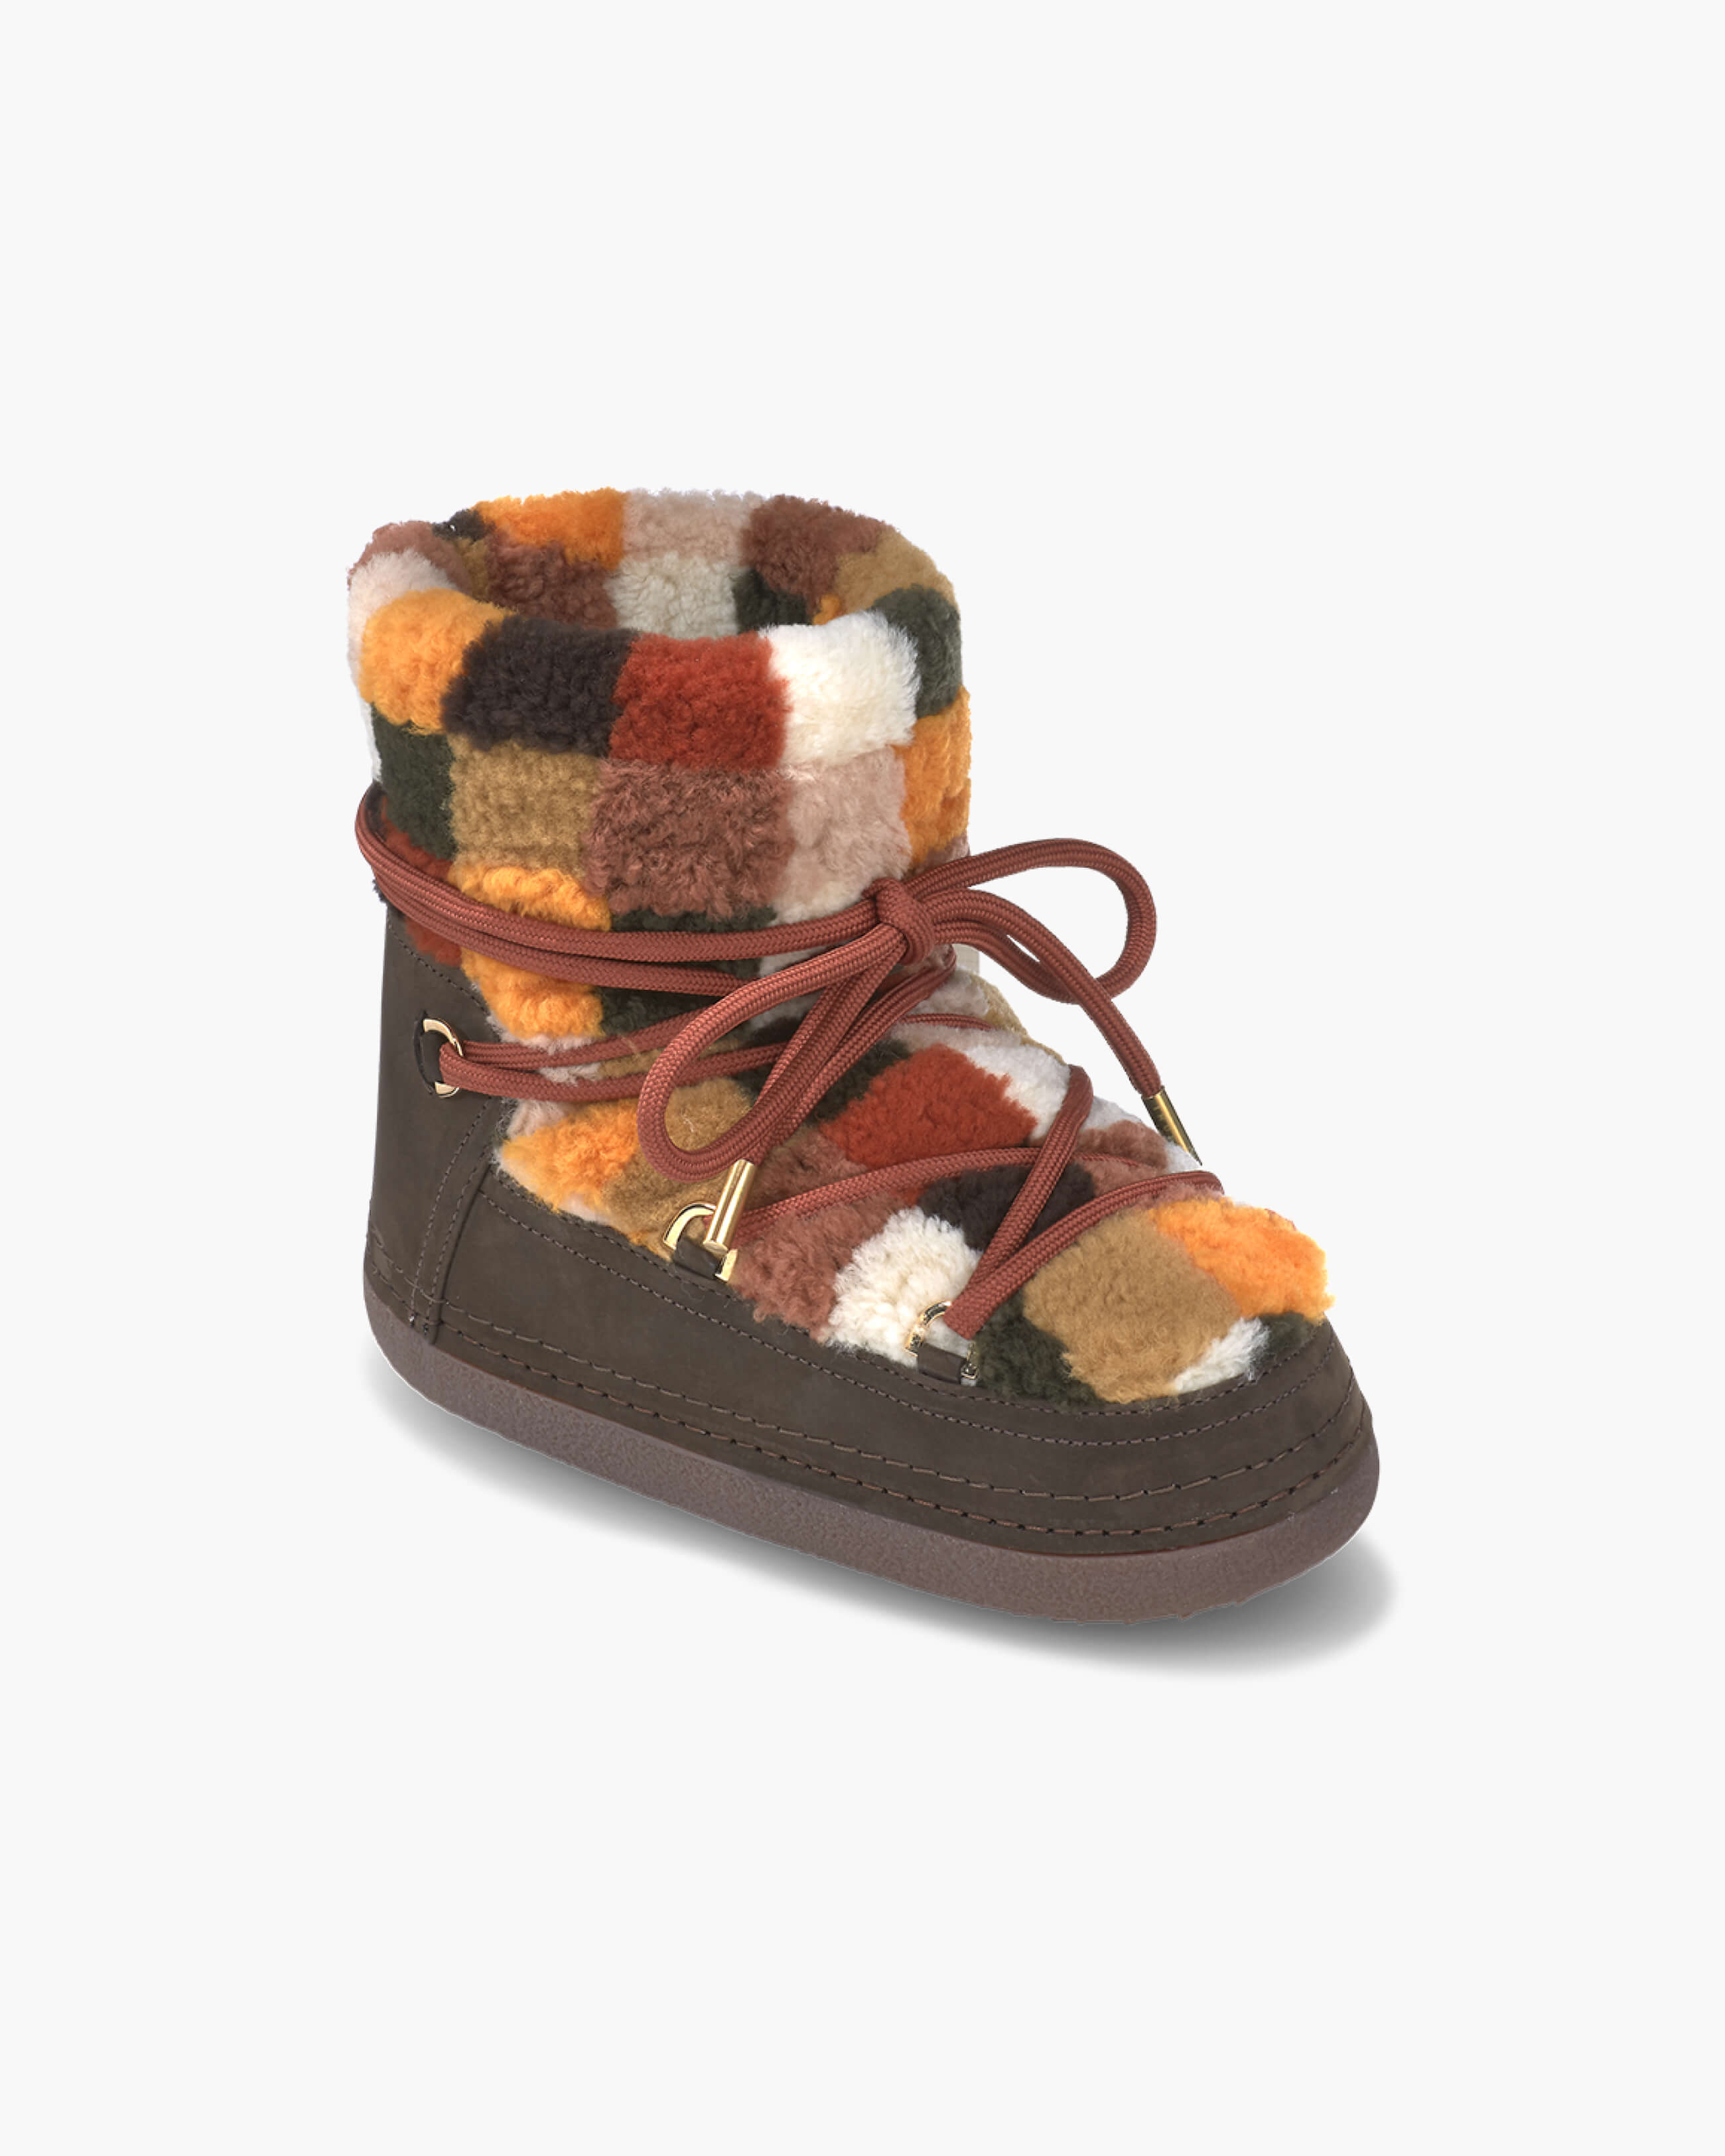 Shearling Patchwork Boot